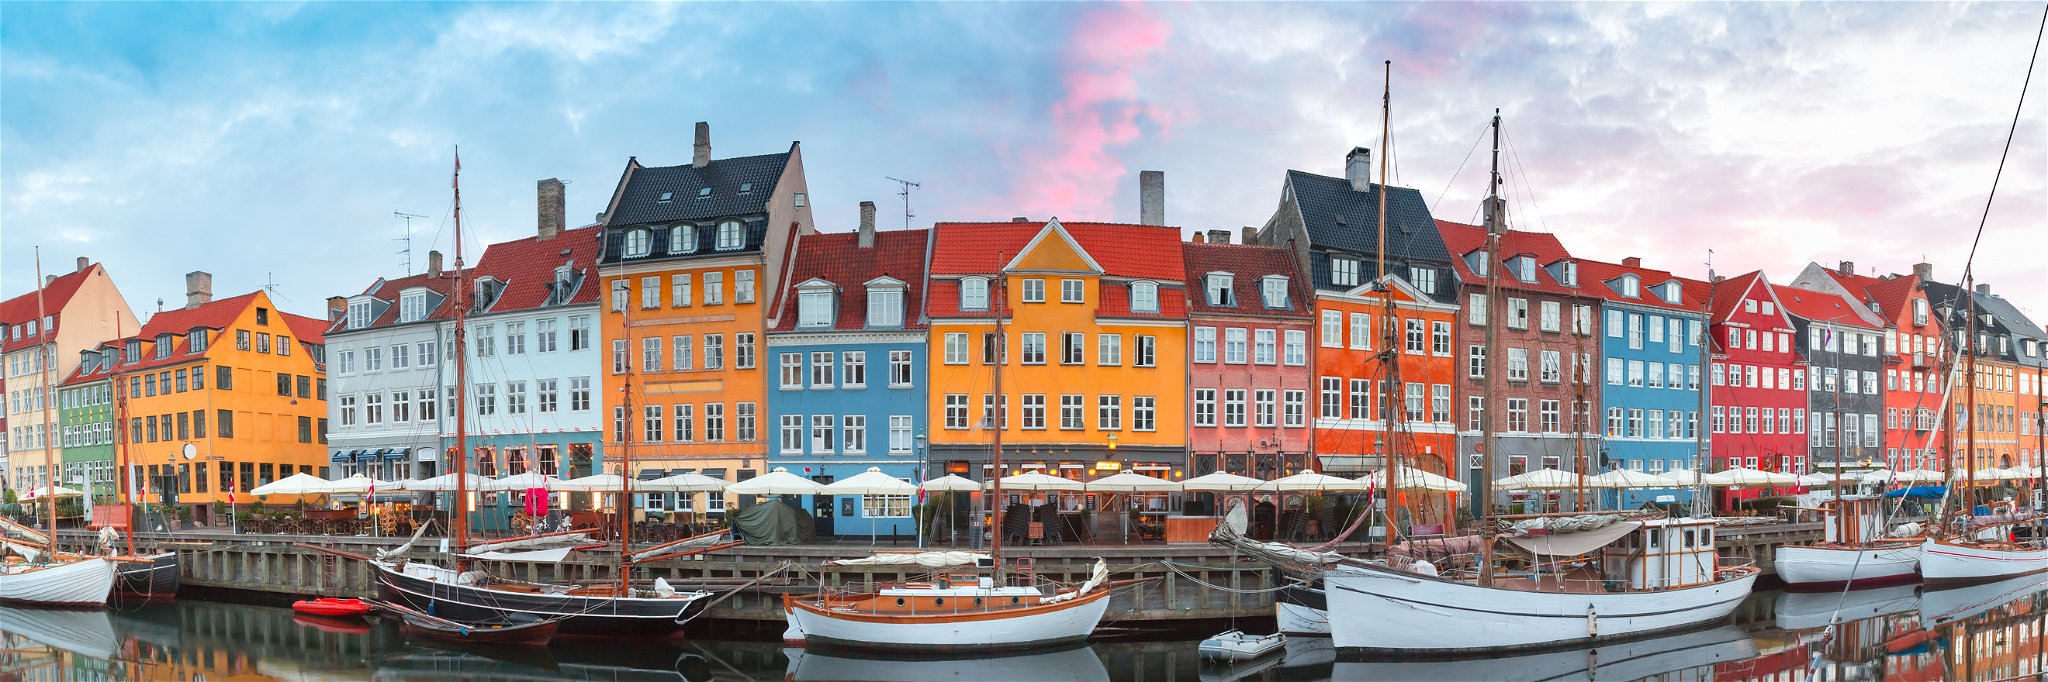 The old town of Copenhagen, which has just taken the top slot in the Safest Cities Index.

